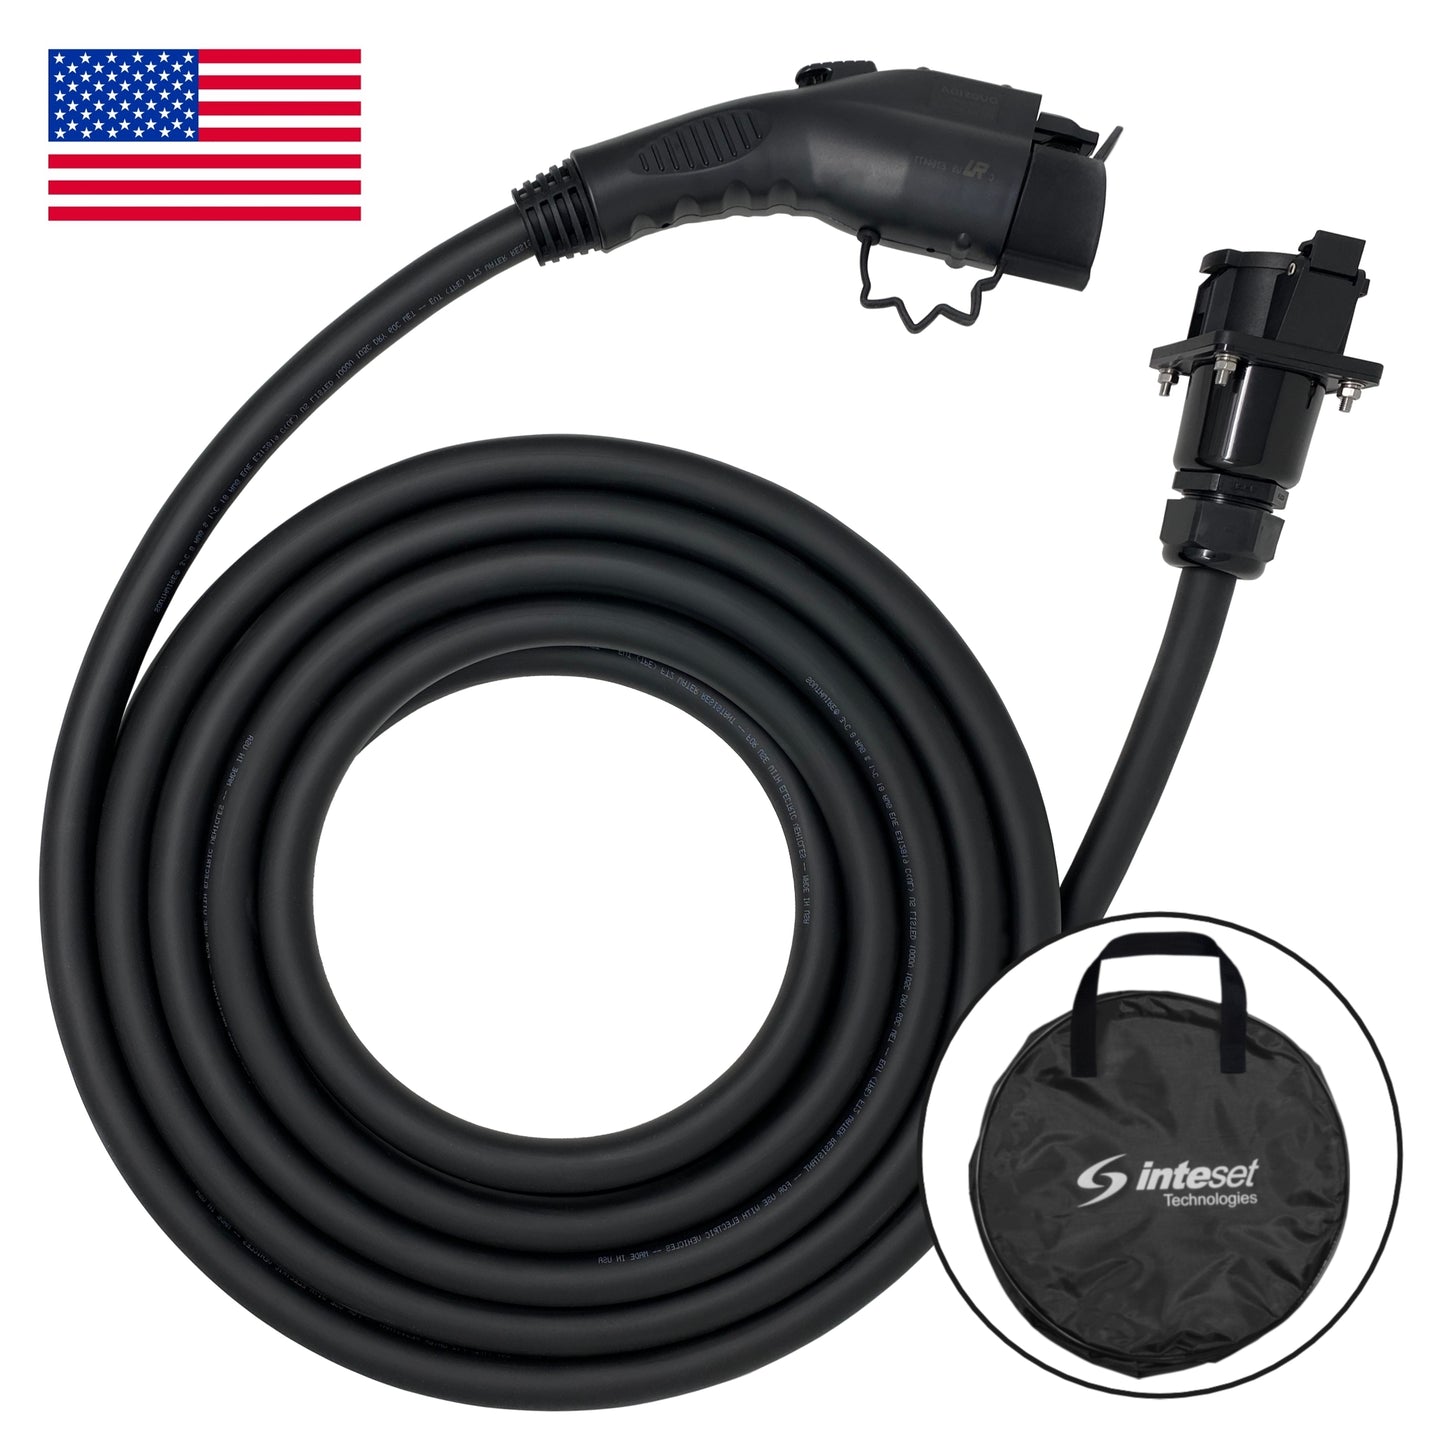 Electric Vehicle Extension Cable - 48 Amp - 20', 30' - Ultra Flex - Made In USA